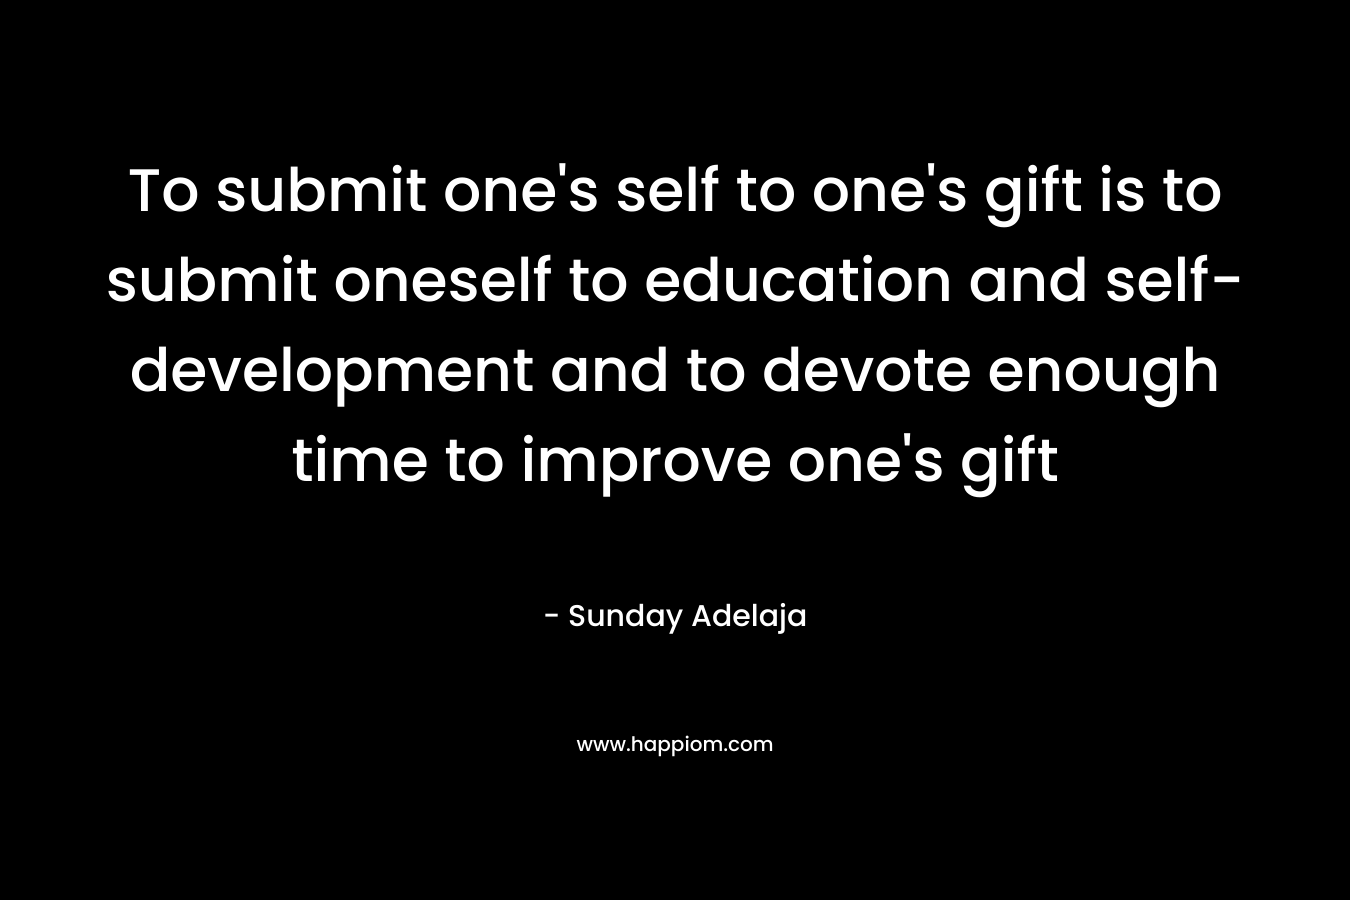 To submit one's self to one's gift is to submit oneself to education and self-development and to devote enough time to improve one's gift